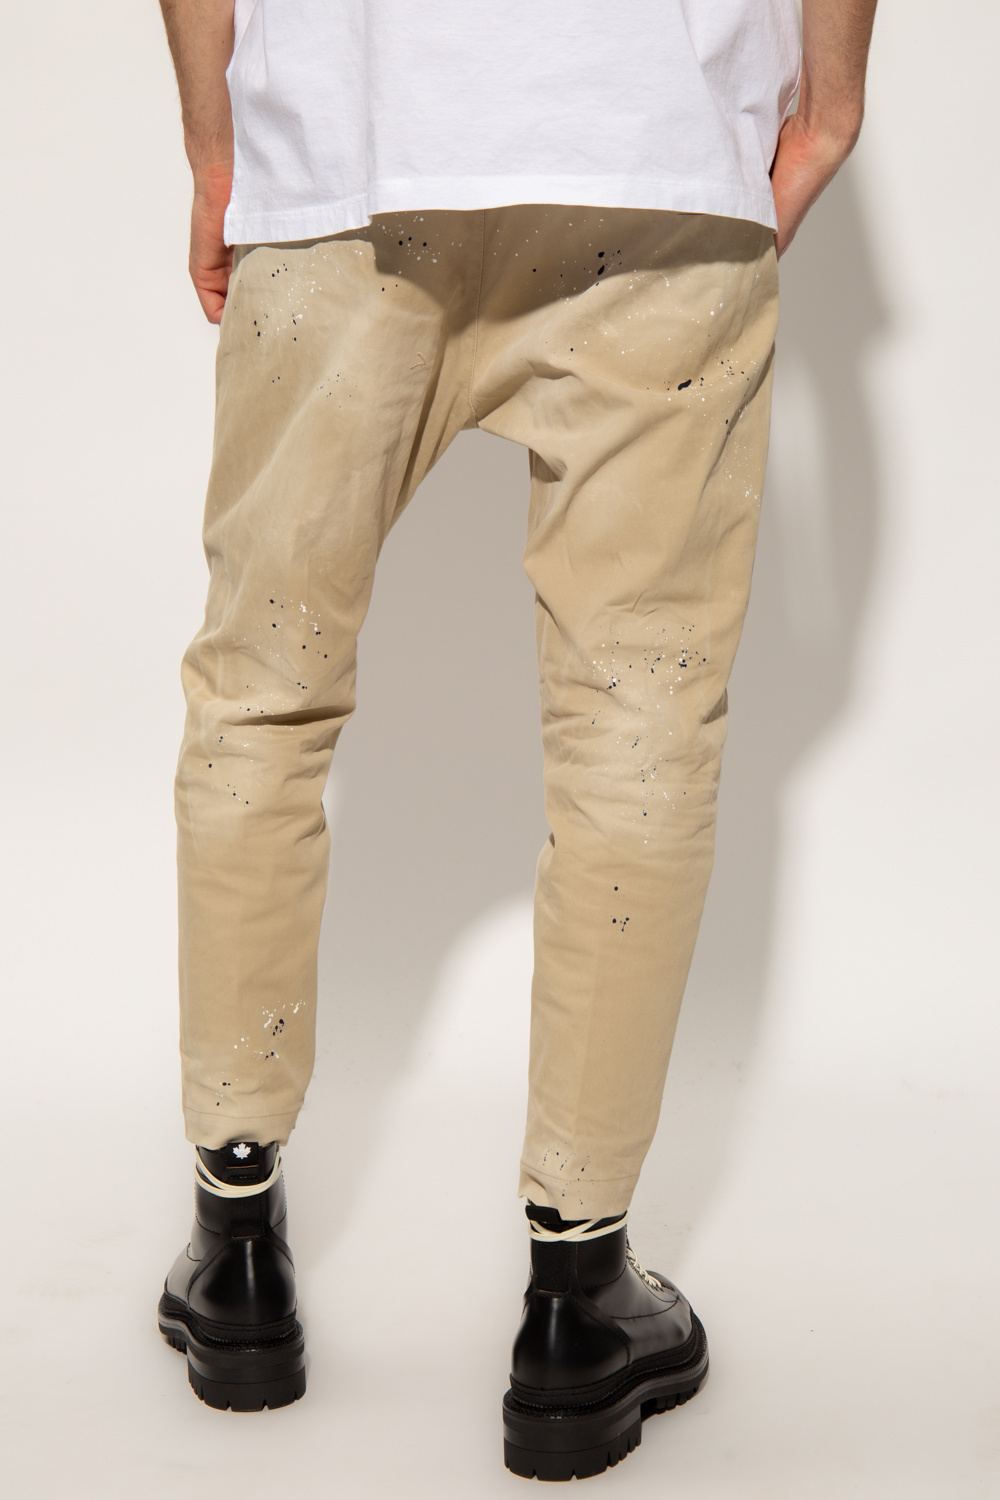 Dsquared2 ‘Hand Me Down Fit’ trousers